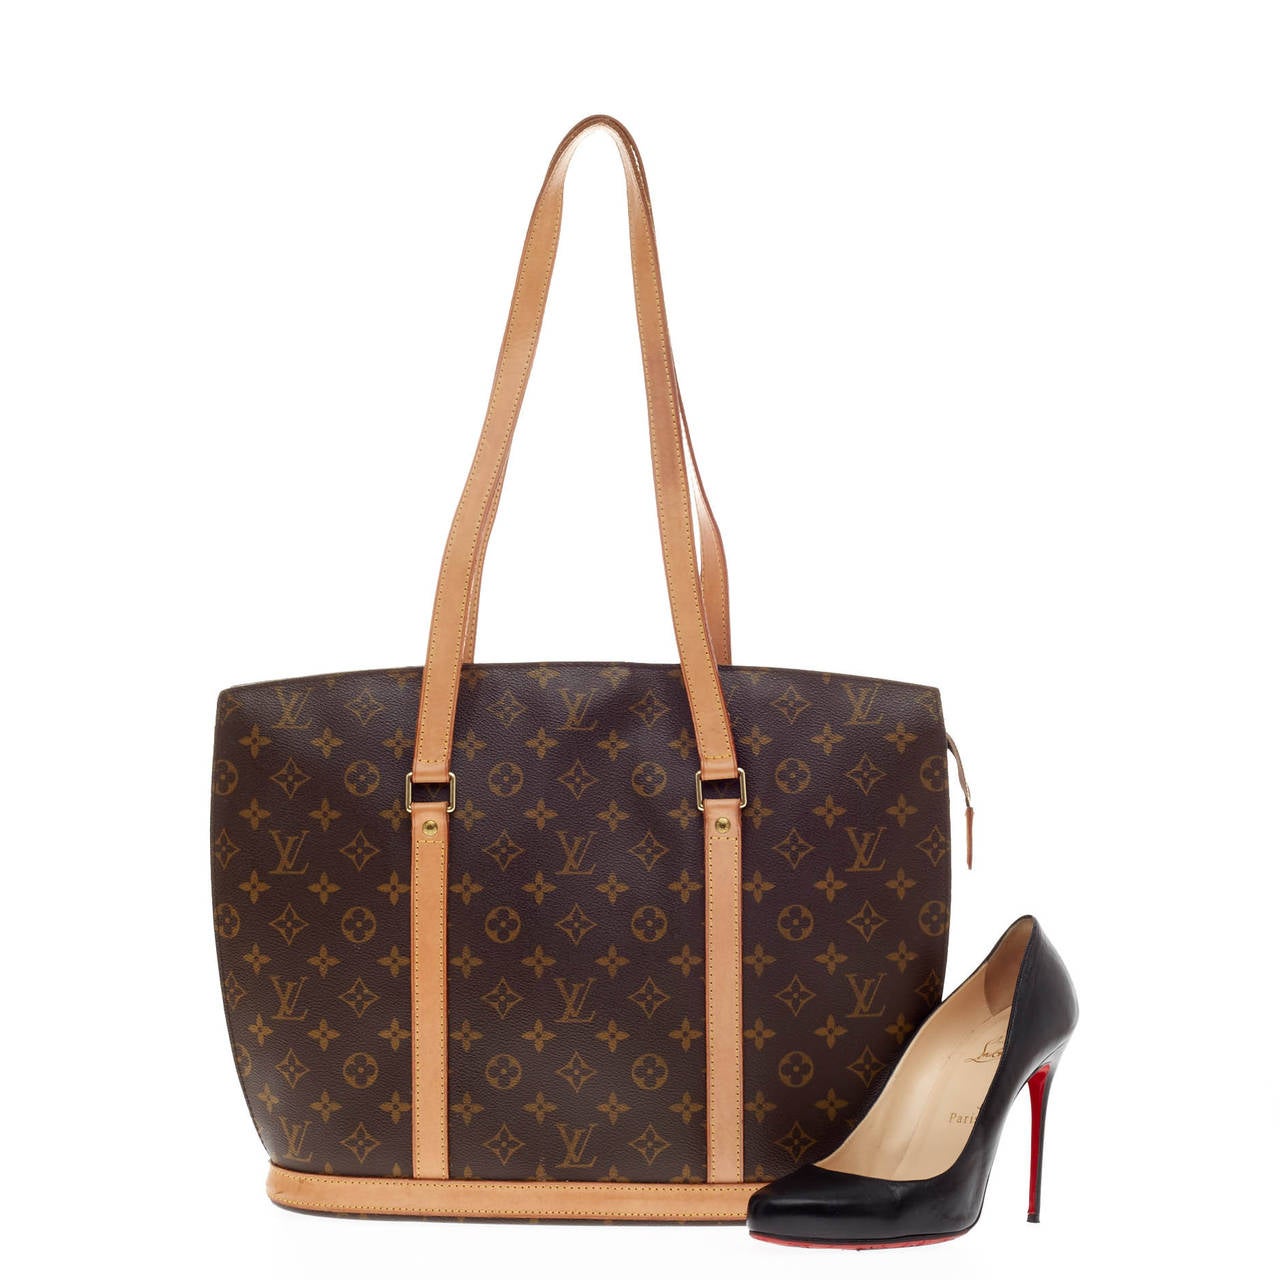 This authentic Louis Vuitton Babylone Monogram Canvas is a stylish and durable tote that is ideal for everyday use. Crafted from monogram canvas, this bag features natural vachetta cowhide leather straps and trims, gold-tone hardware accents and a